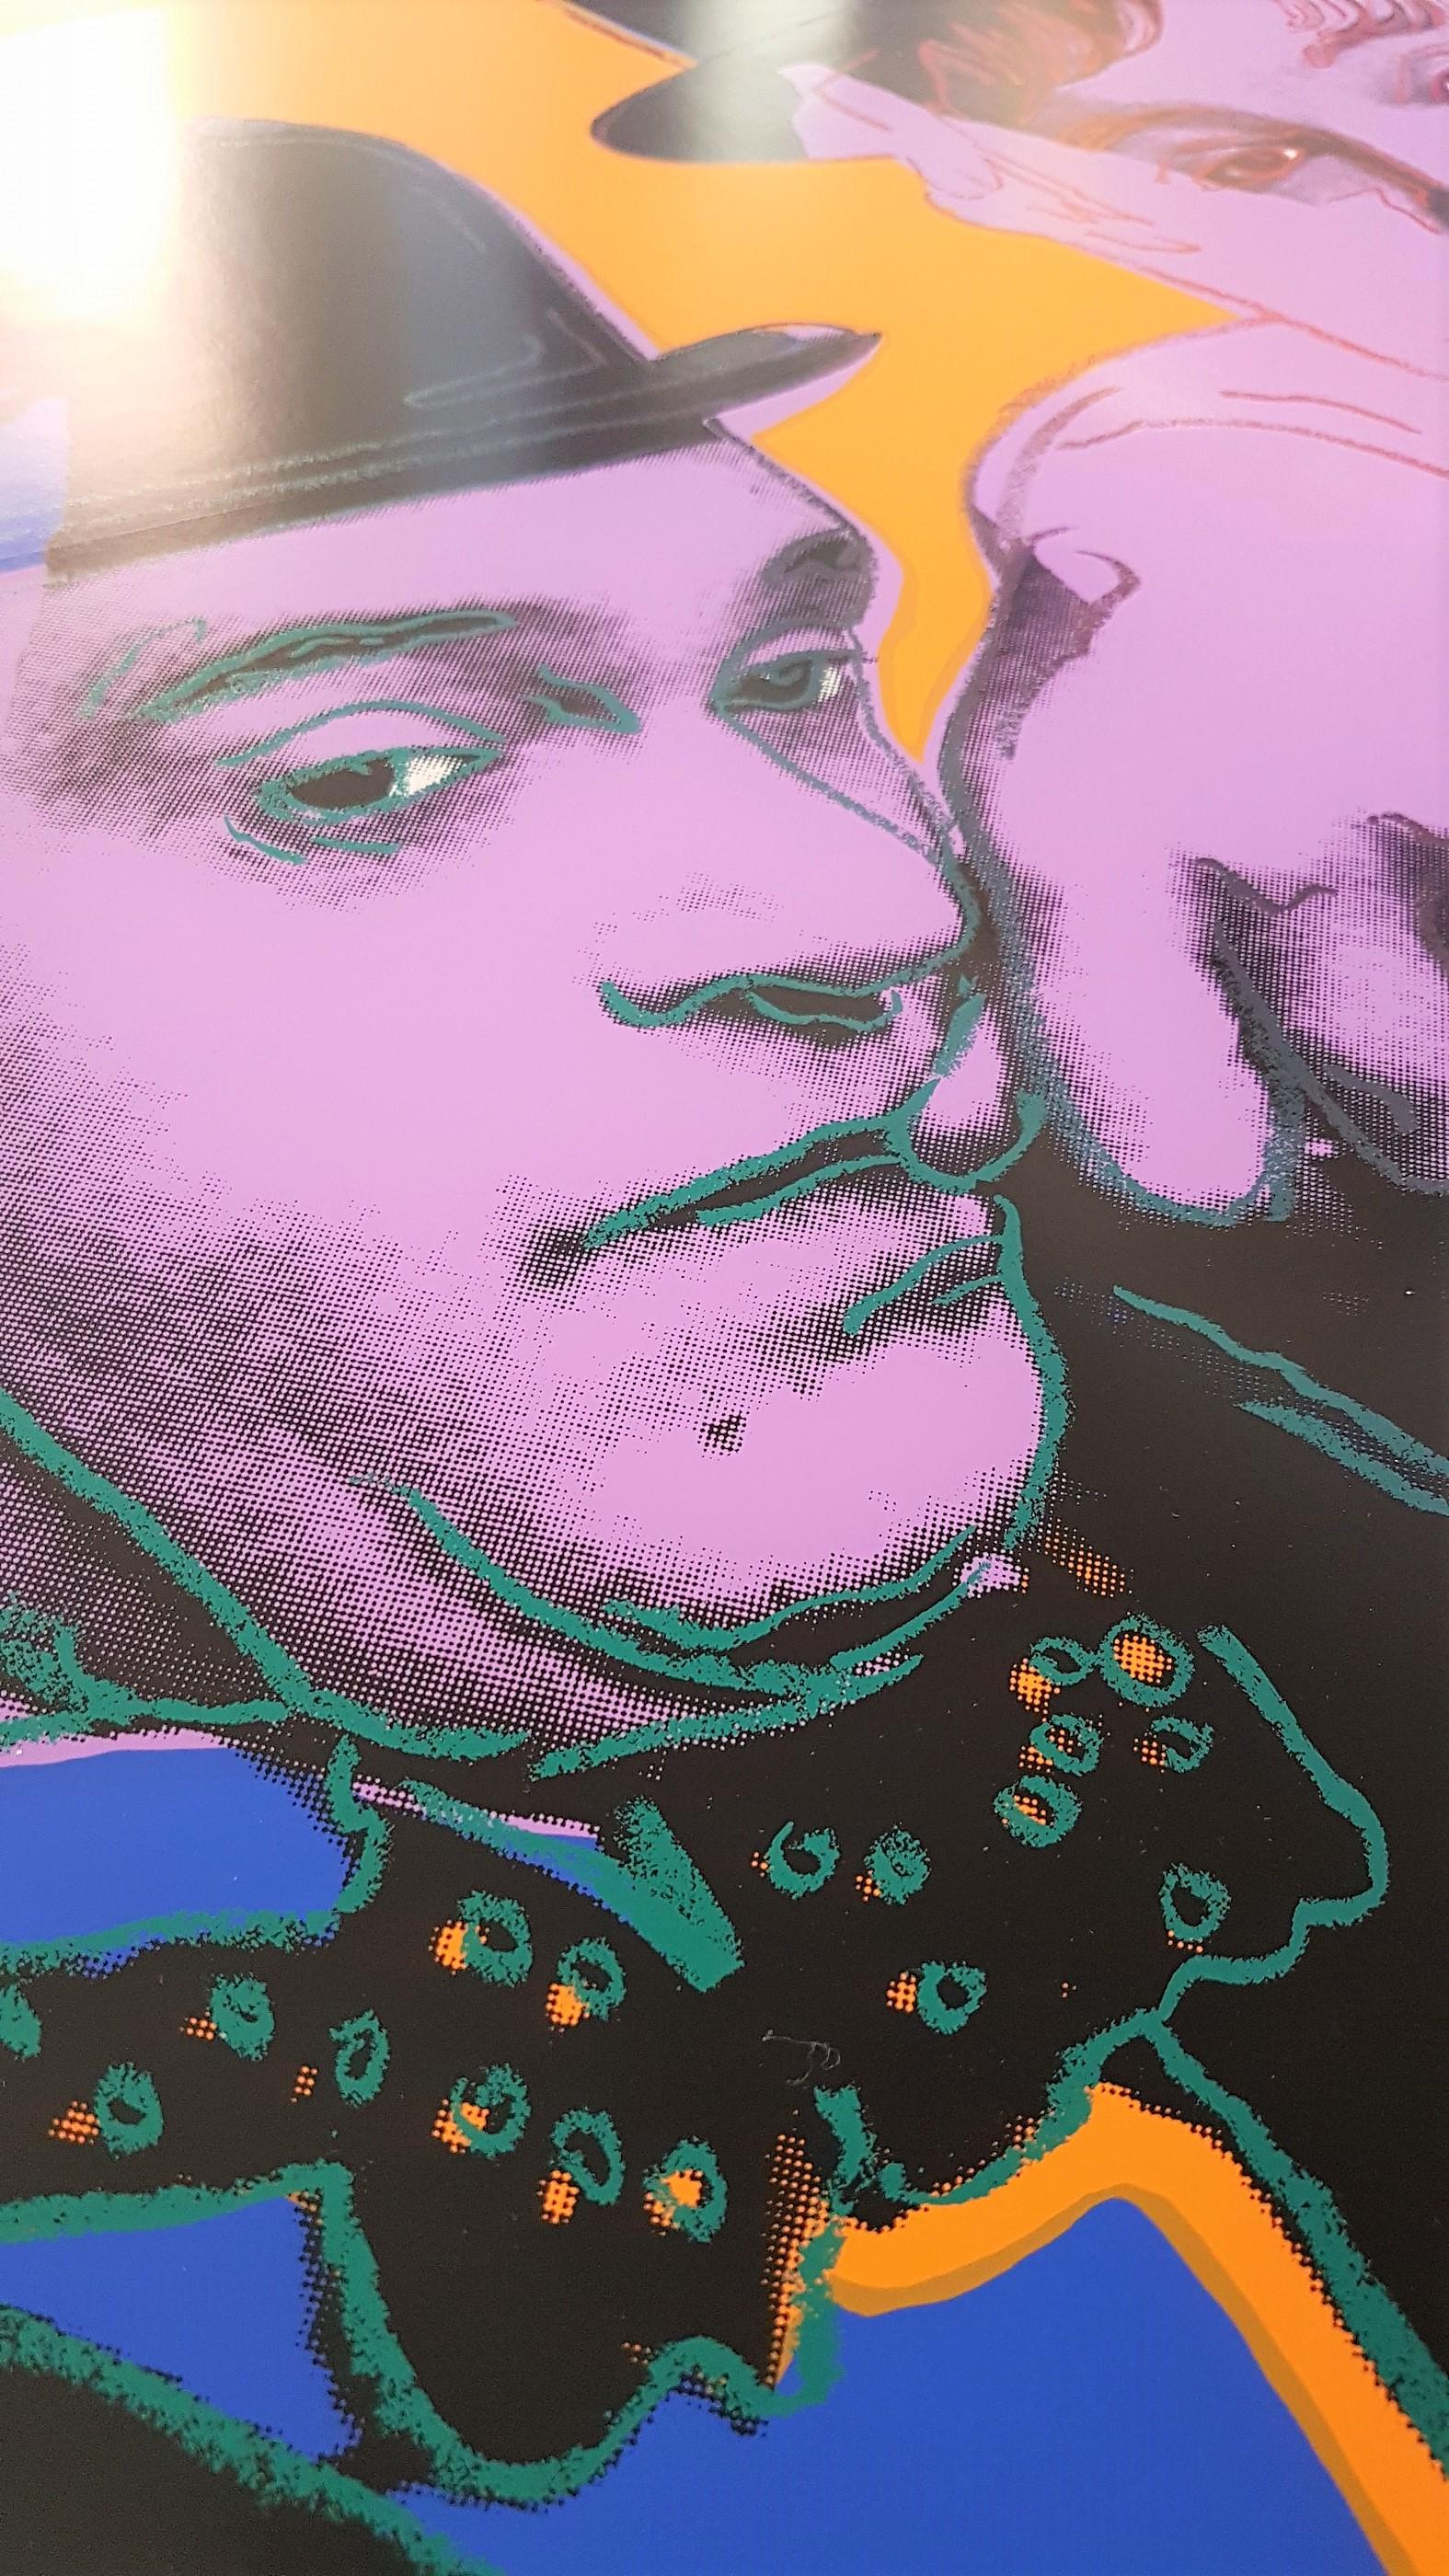 $45 SHIPPING U.S. only (not $499) - Simply request a quote during Checkout

Jürgen Kuhl
Stan and Laurel (Pop Art, Andy Warhol)
Color Silkscreen
Year: 2000s
Signed and numbered by hand
Edition: 150
Size: 32.8 × 32.8 inches 
COA provided


About